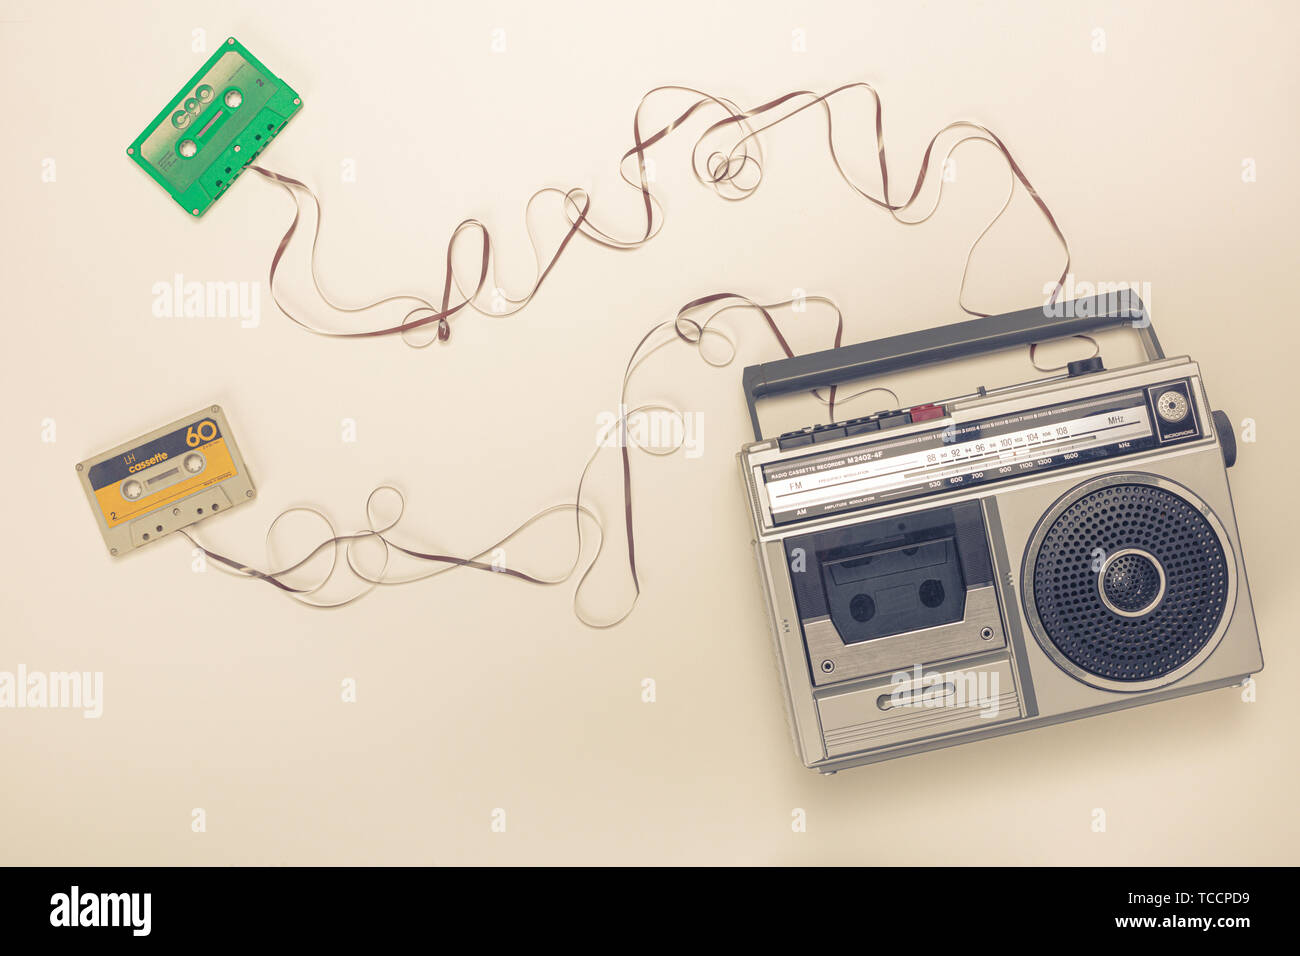 Old radio with tape recorder and cassettes with ribbon forming a wire. Flat lay style. Stock Photo